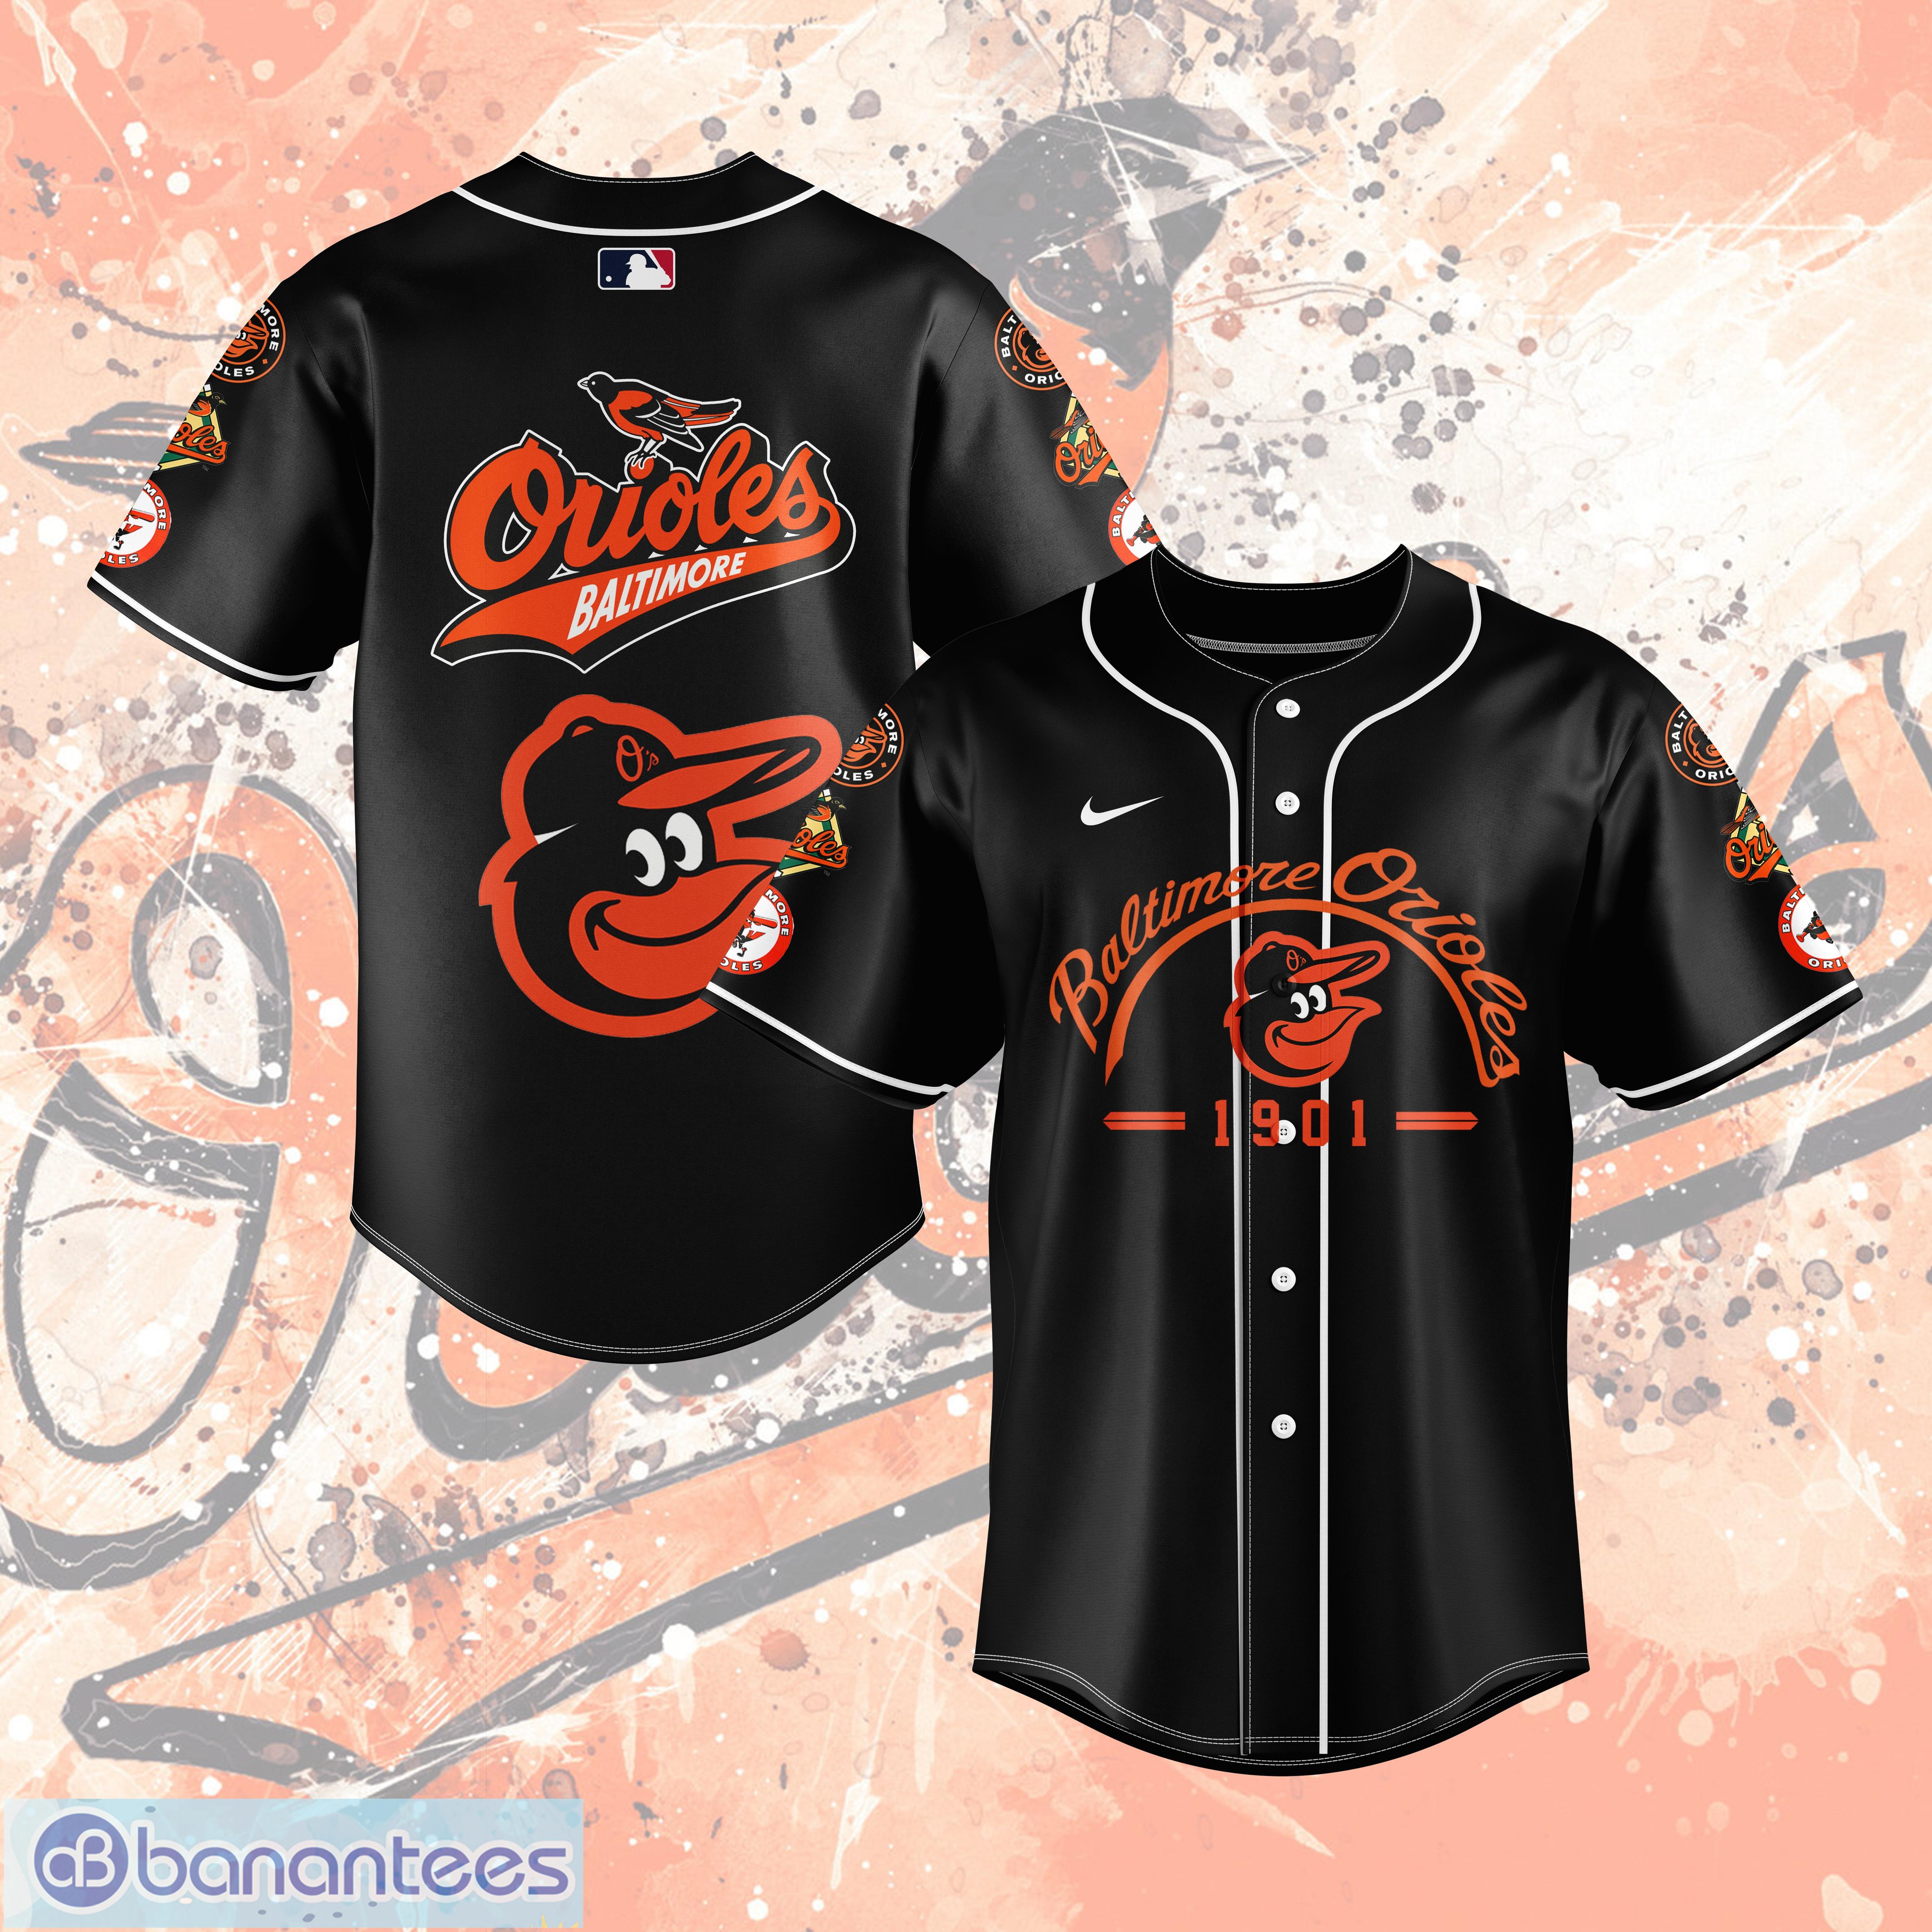 NEW - 2023 Baltimore Orioles Soccer Jersey 7/15/23 - Size XL - NO